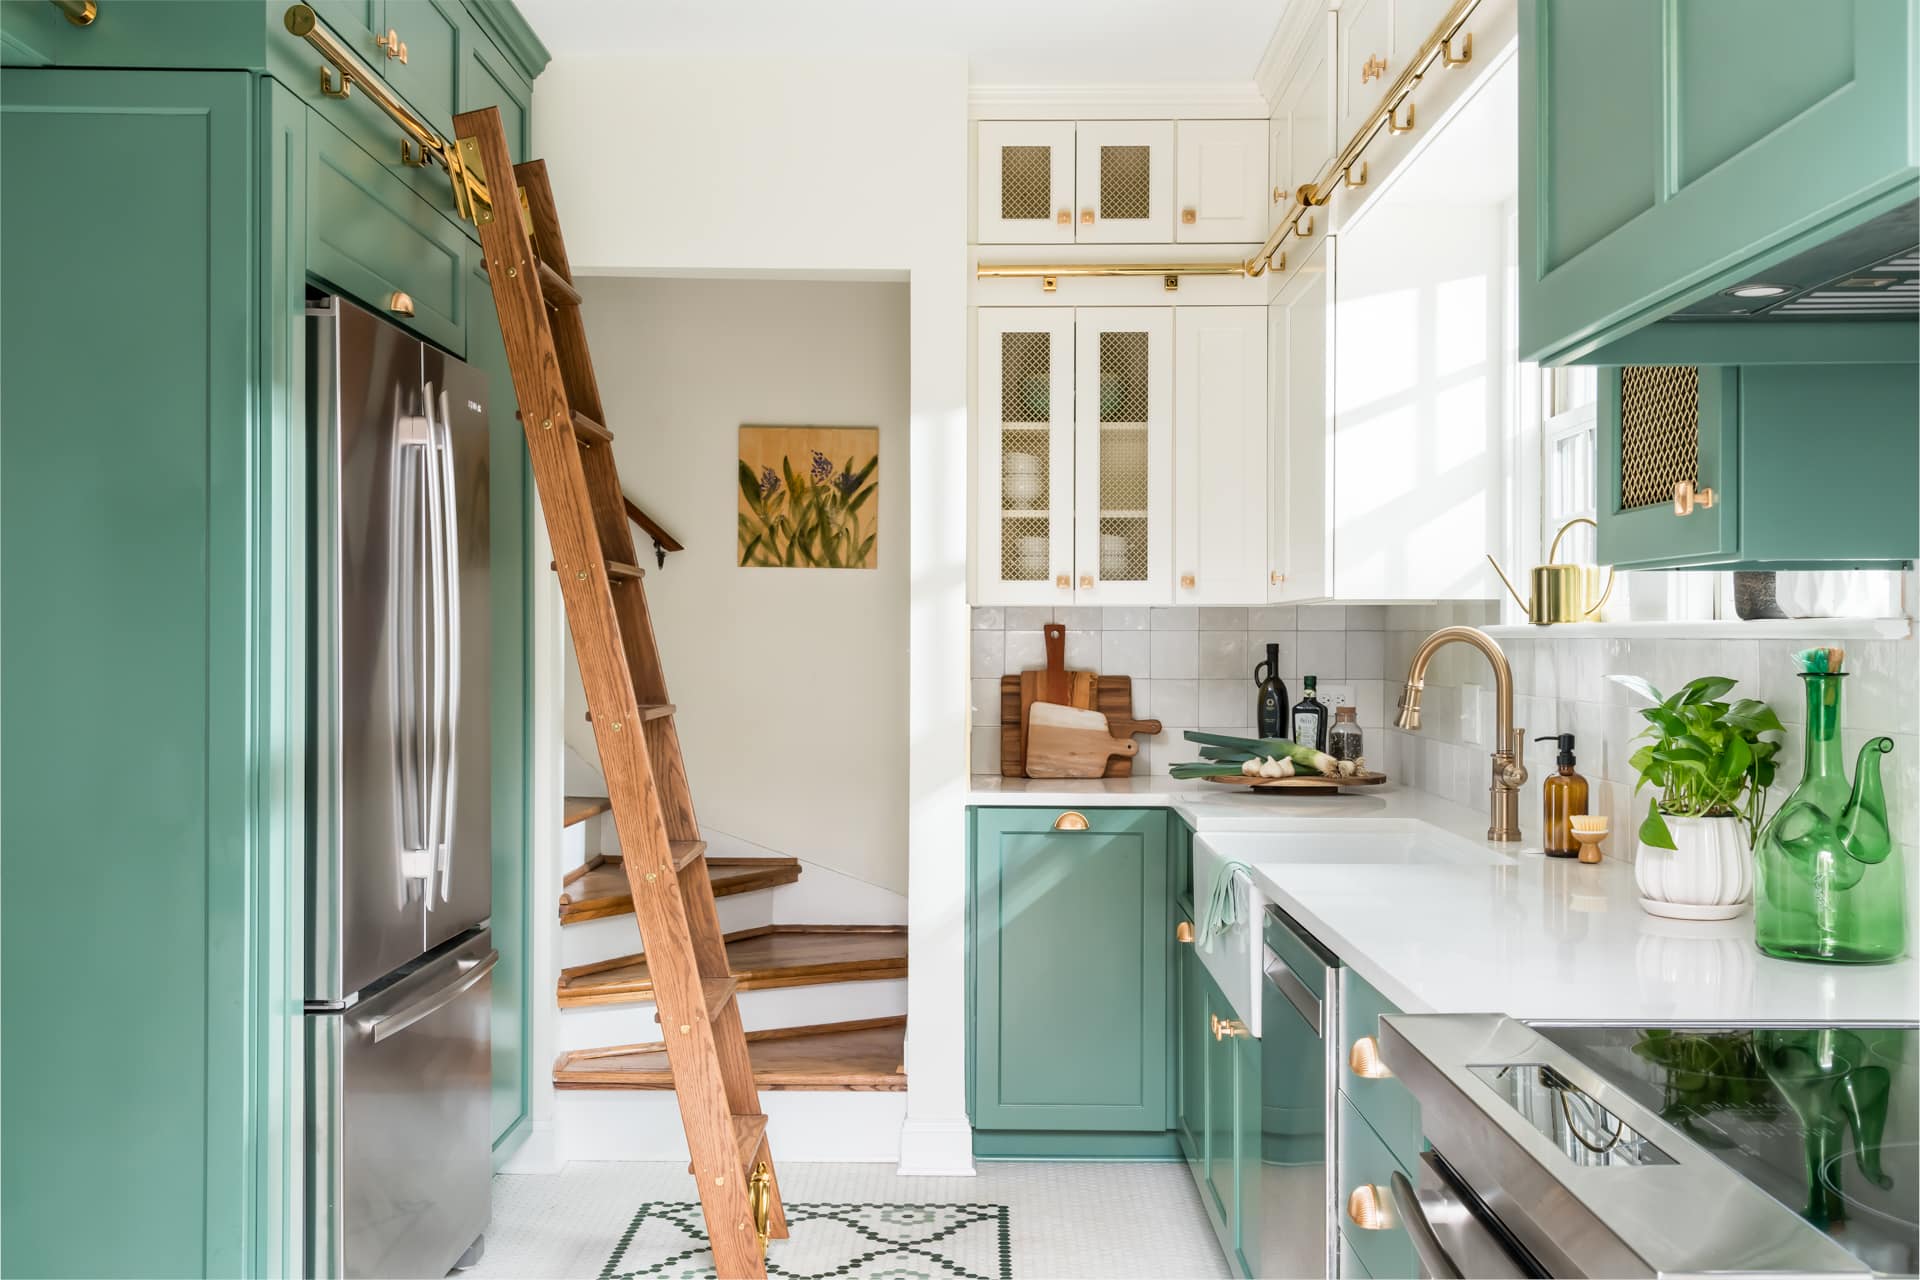 Traditional kitchen with green lower cabinets, white upper cabinets, brass hardware, and natural wood library ladder.